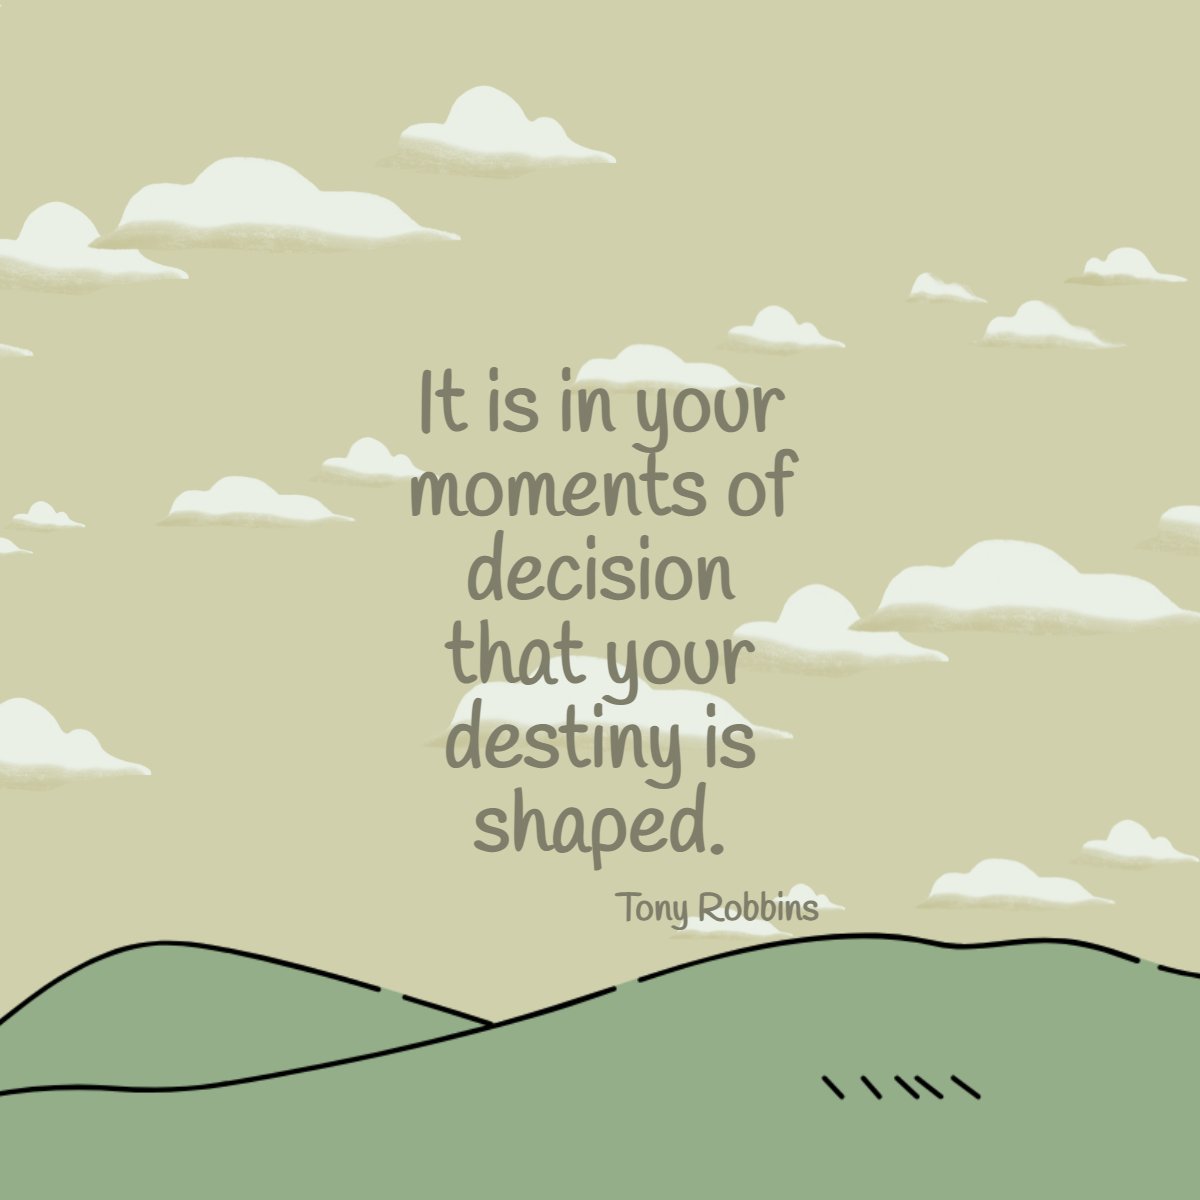 'It is in your moments of decision that your destiny is shaped.'
― Tony Robbins

 #instaquote    #wisdom    #quoteoftheday
#RacingRealEstateAgent #BarrettRealEstate #StoneTreeRealEstateTeam #maricopaazrealestate #racingagent #arizonarealestate #phoenixrealestateagent